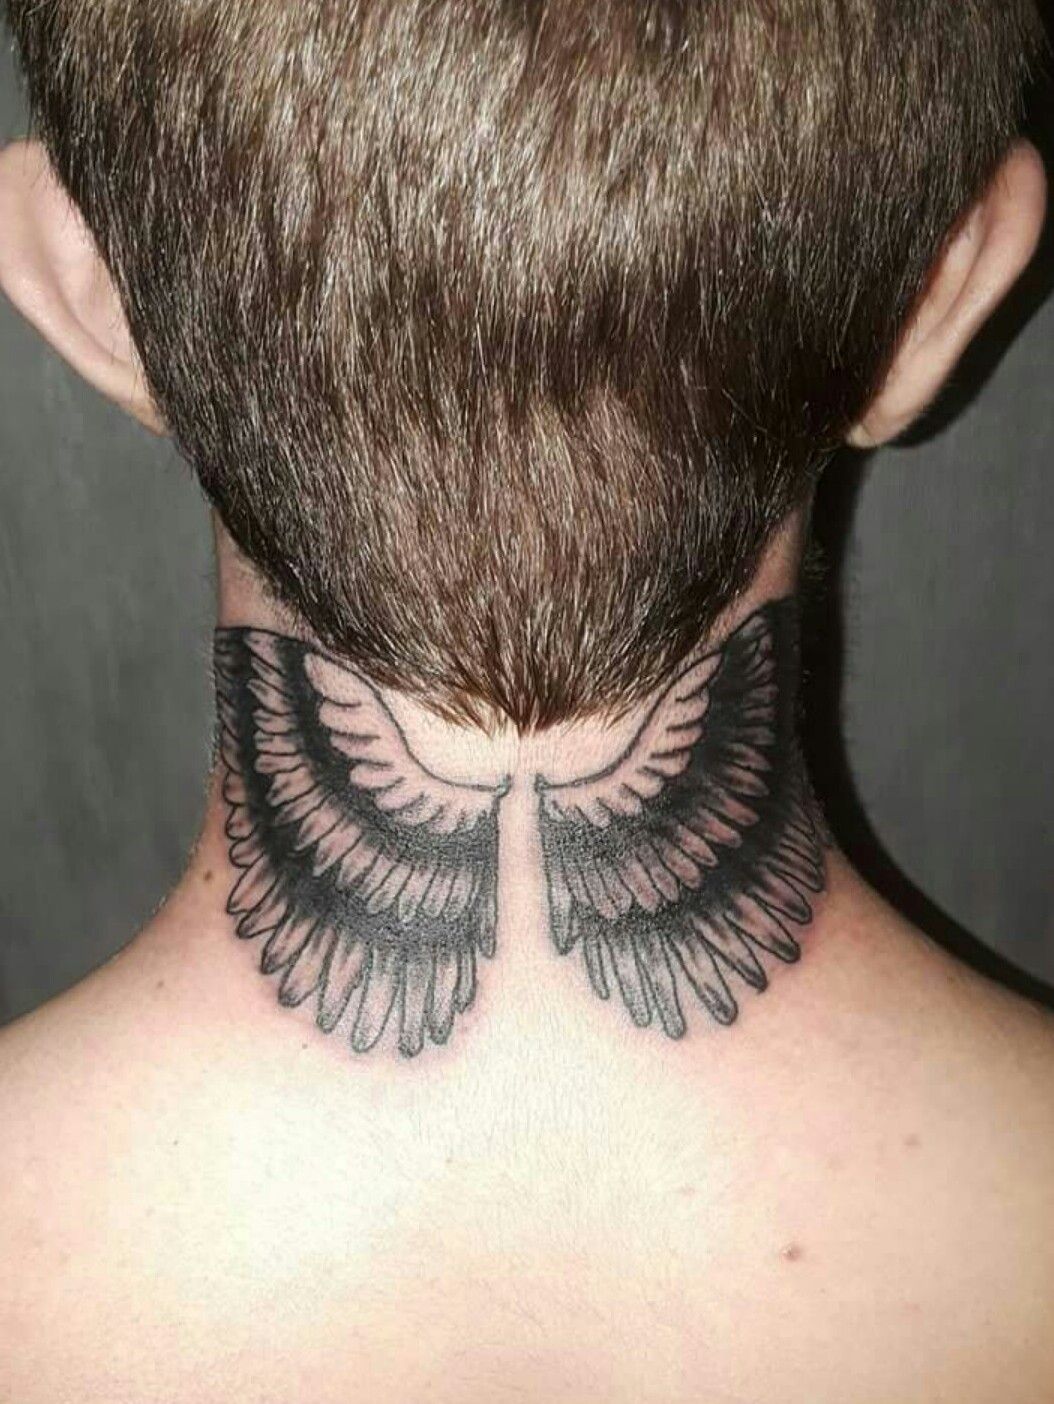 12 Wings Neck Tattoo Ideas To Inspire You  alexie